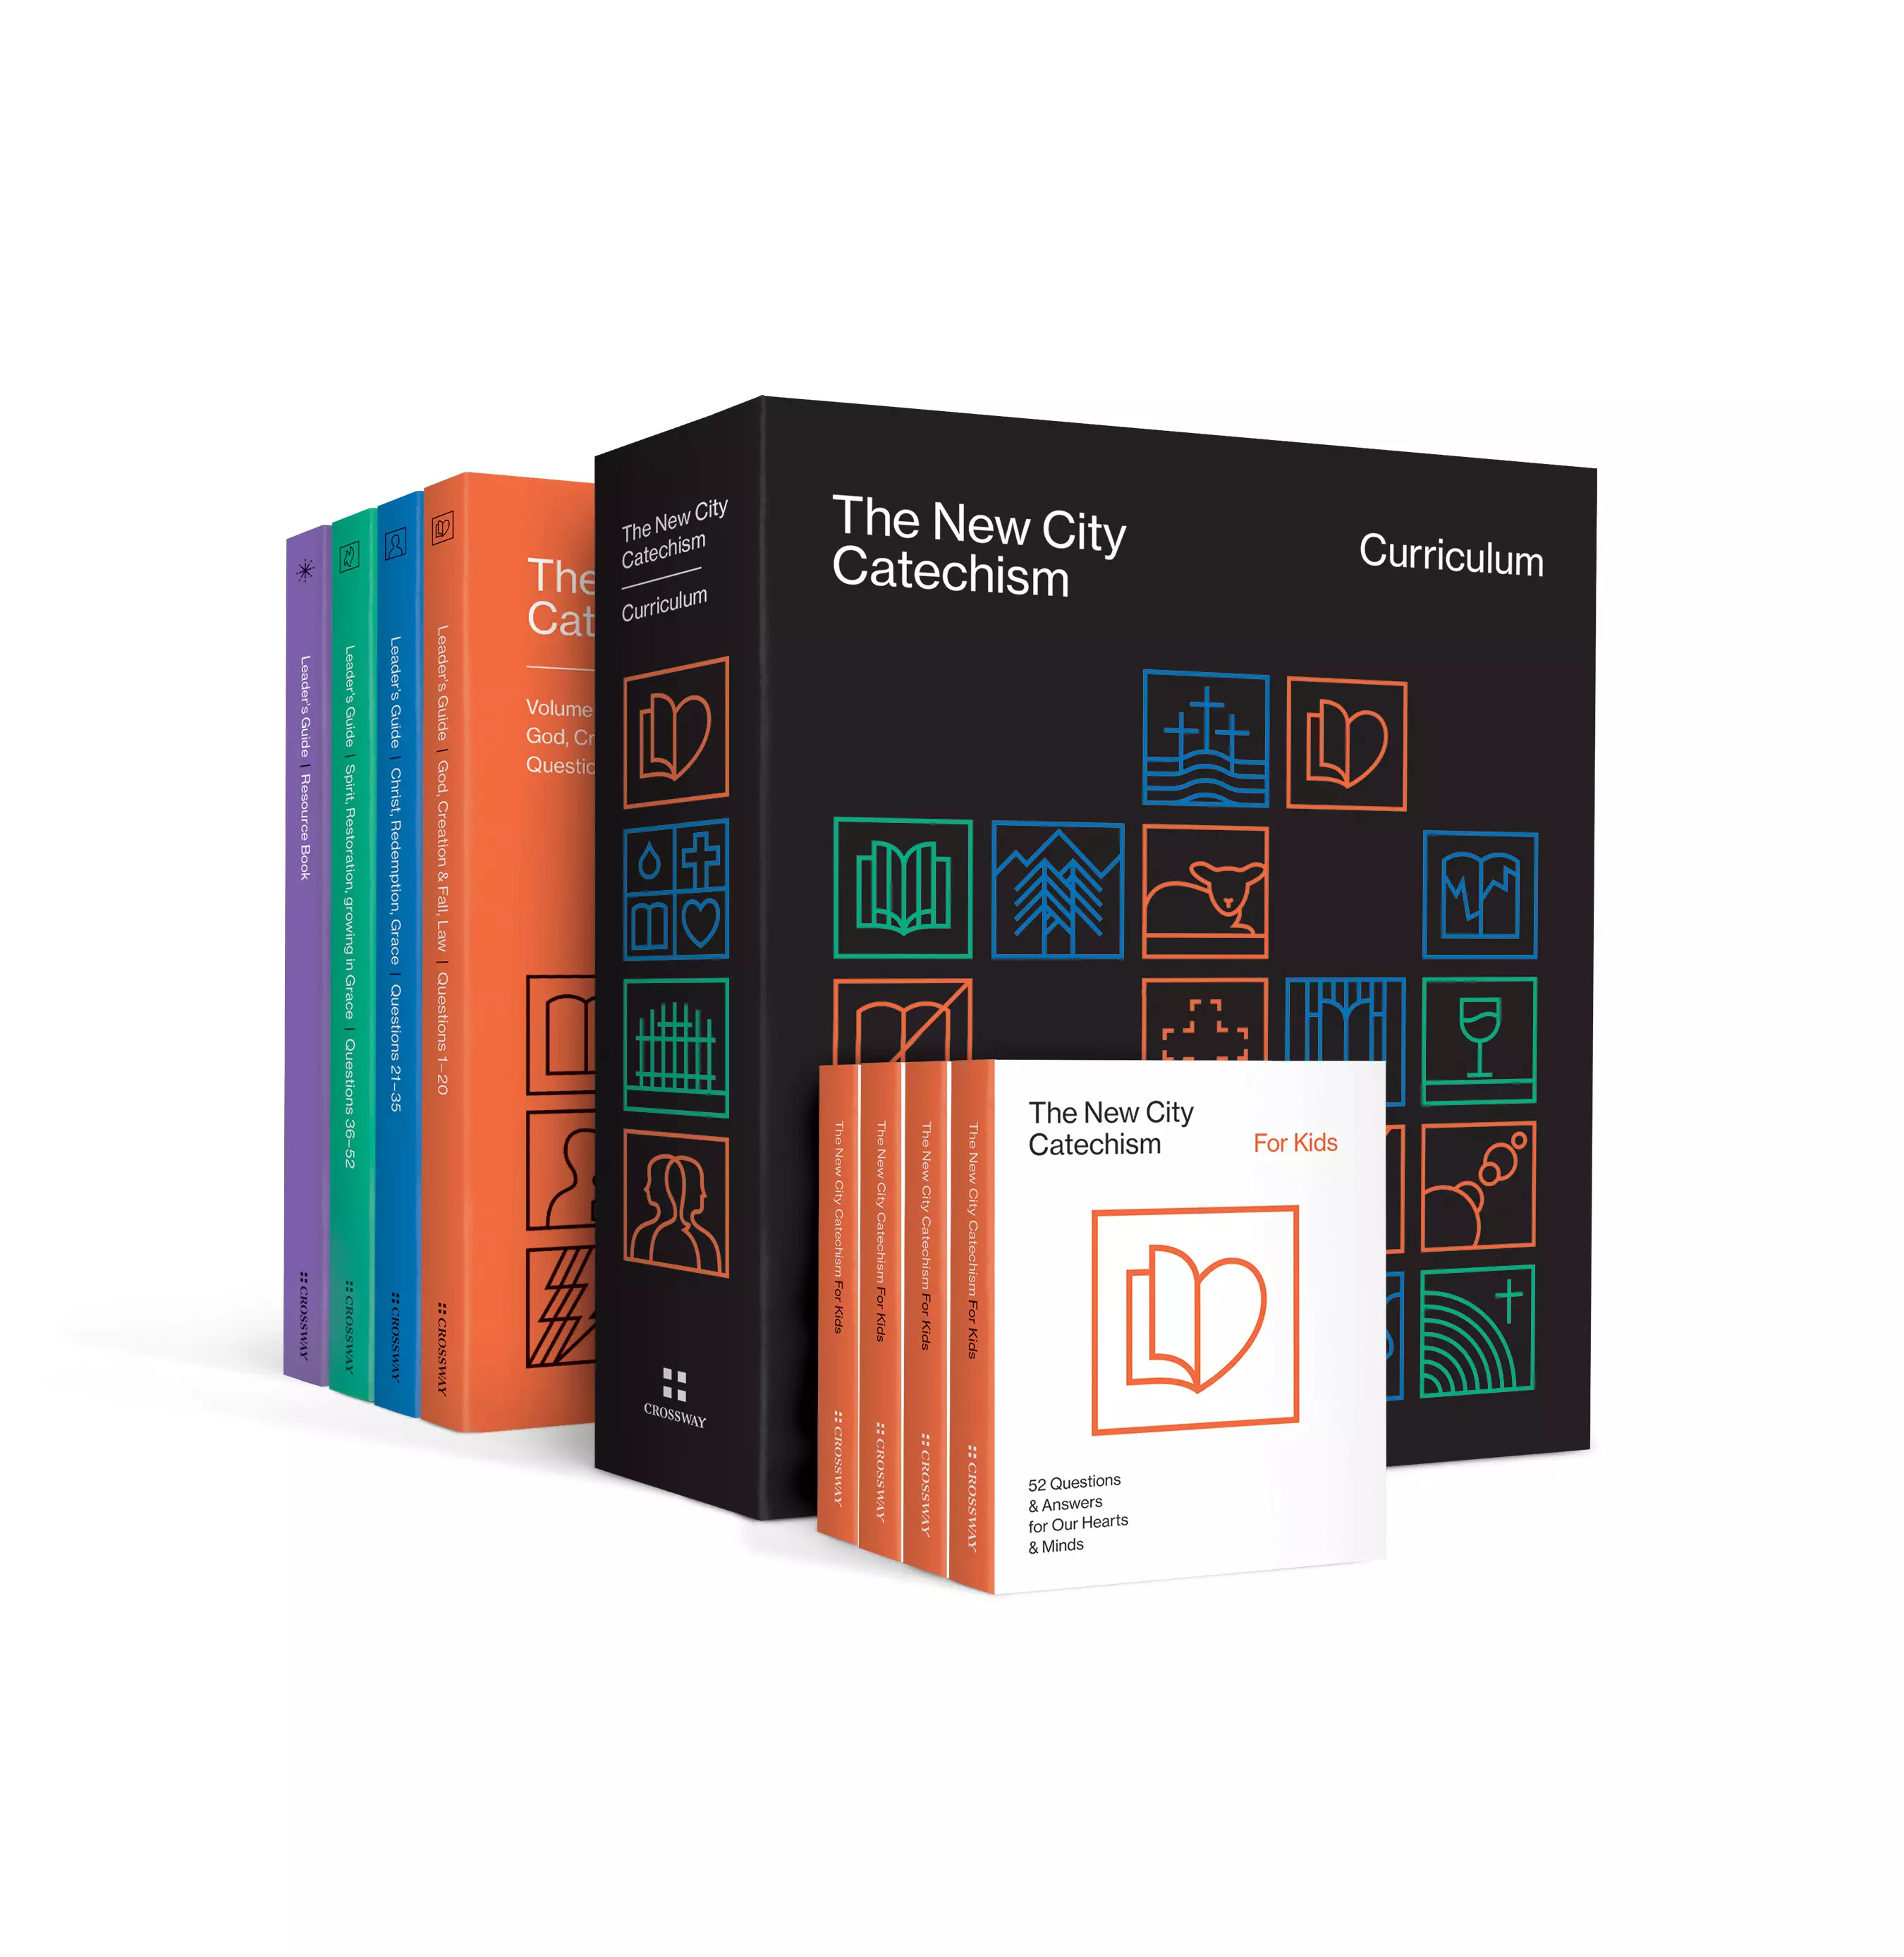 The New City Catechism Curriculum Kit